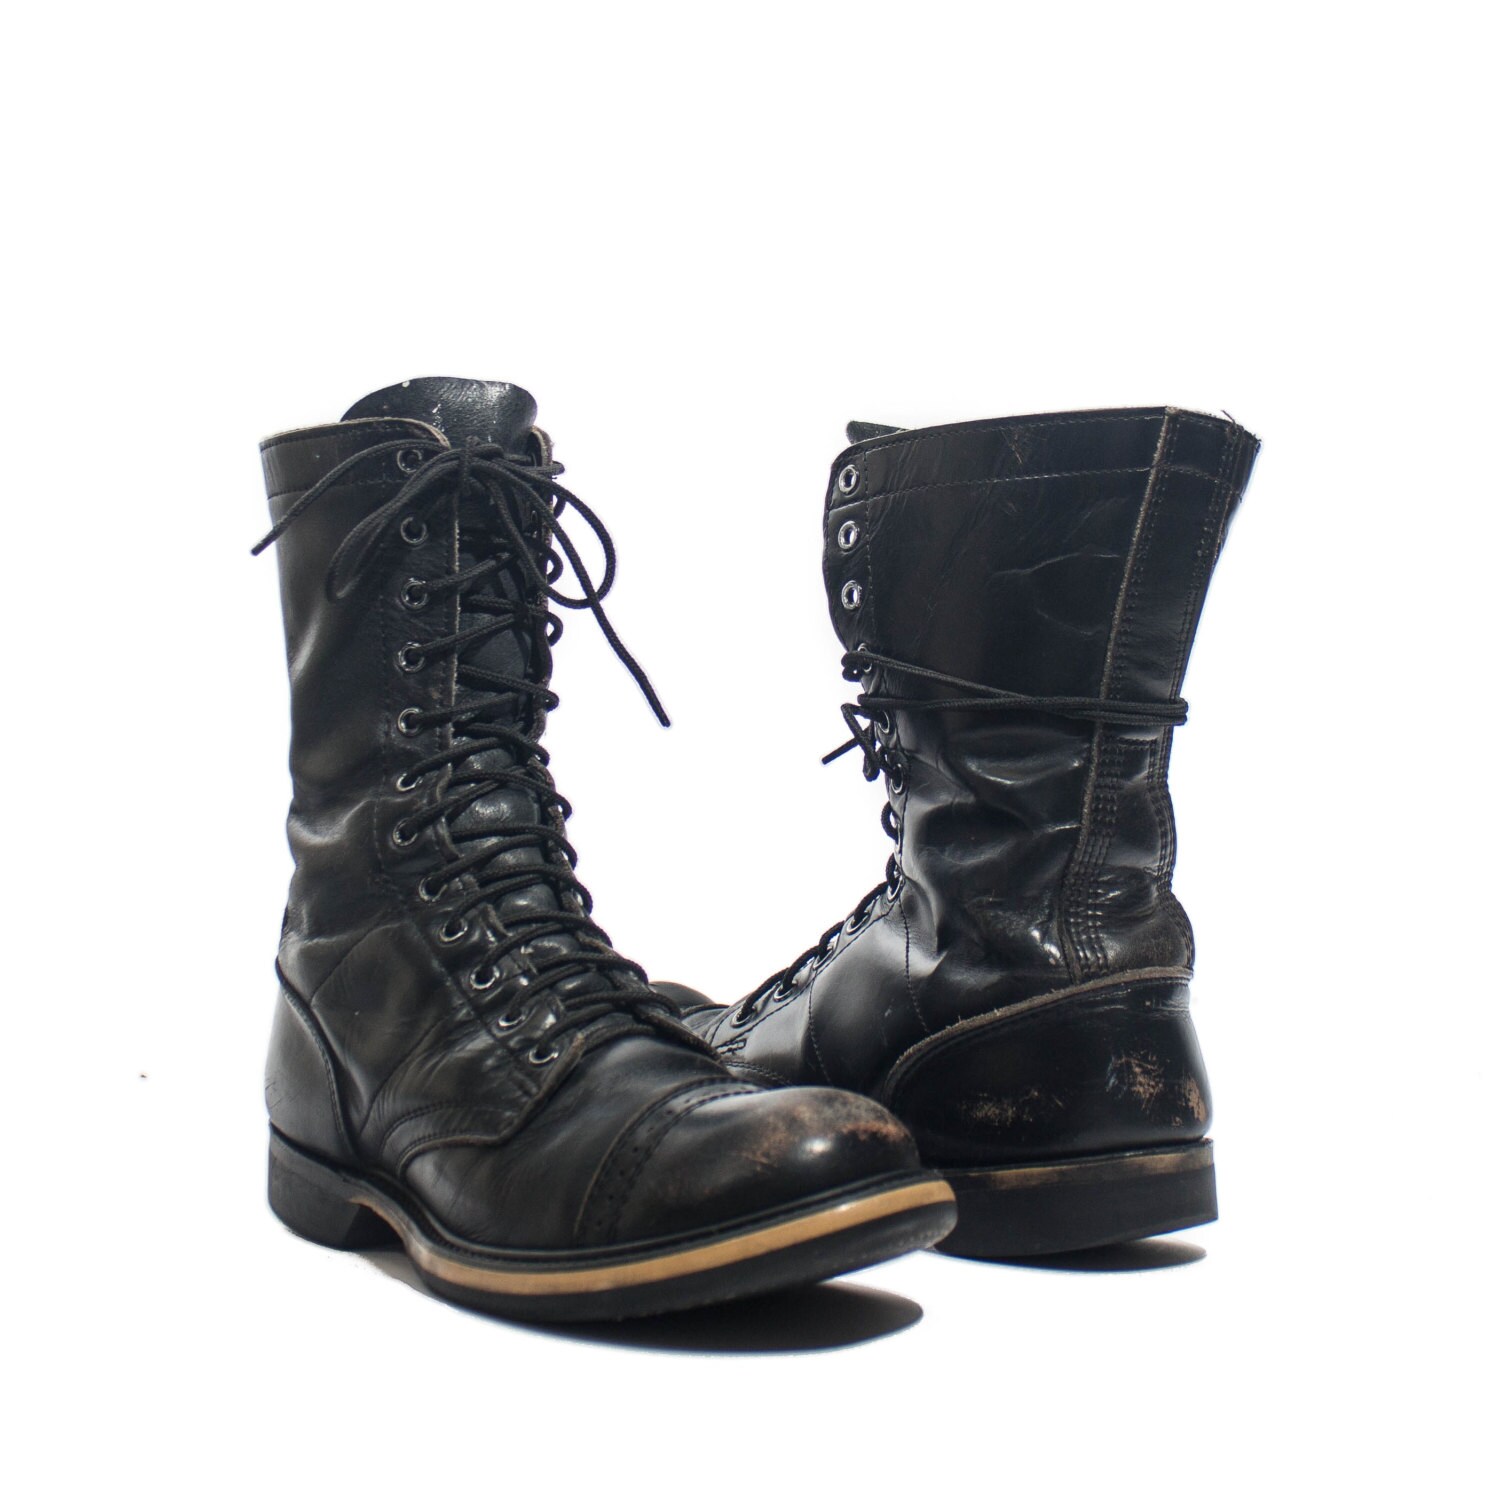 Vintage Combat Boots Double H Brand Cap Toe Military Jump Boot